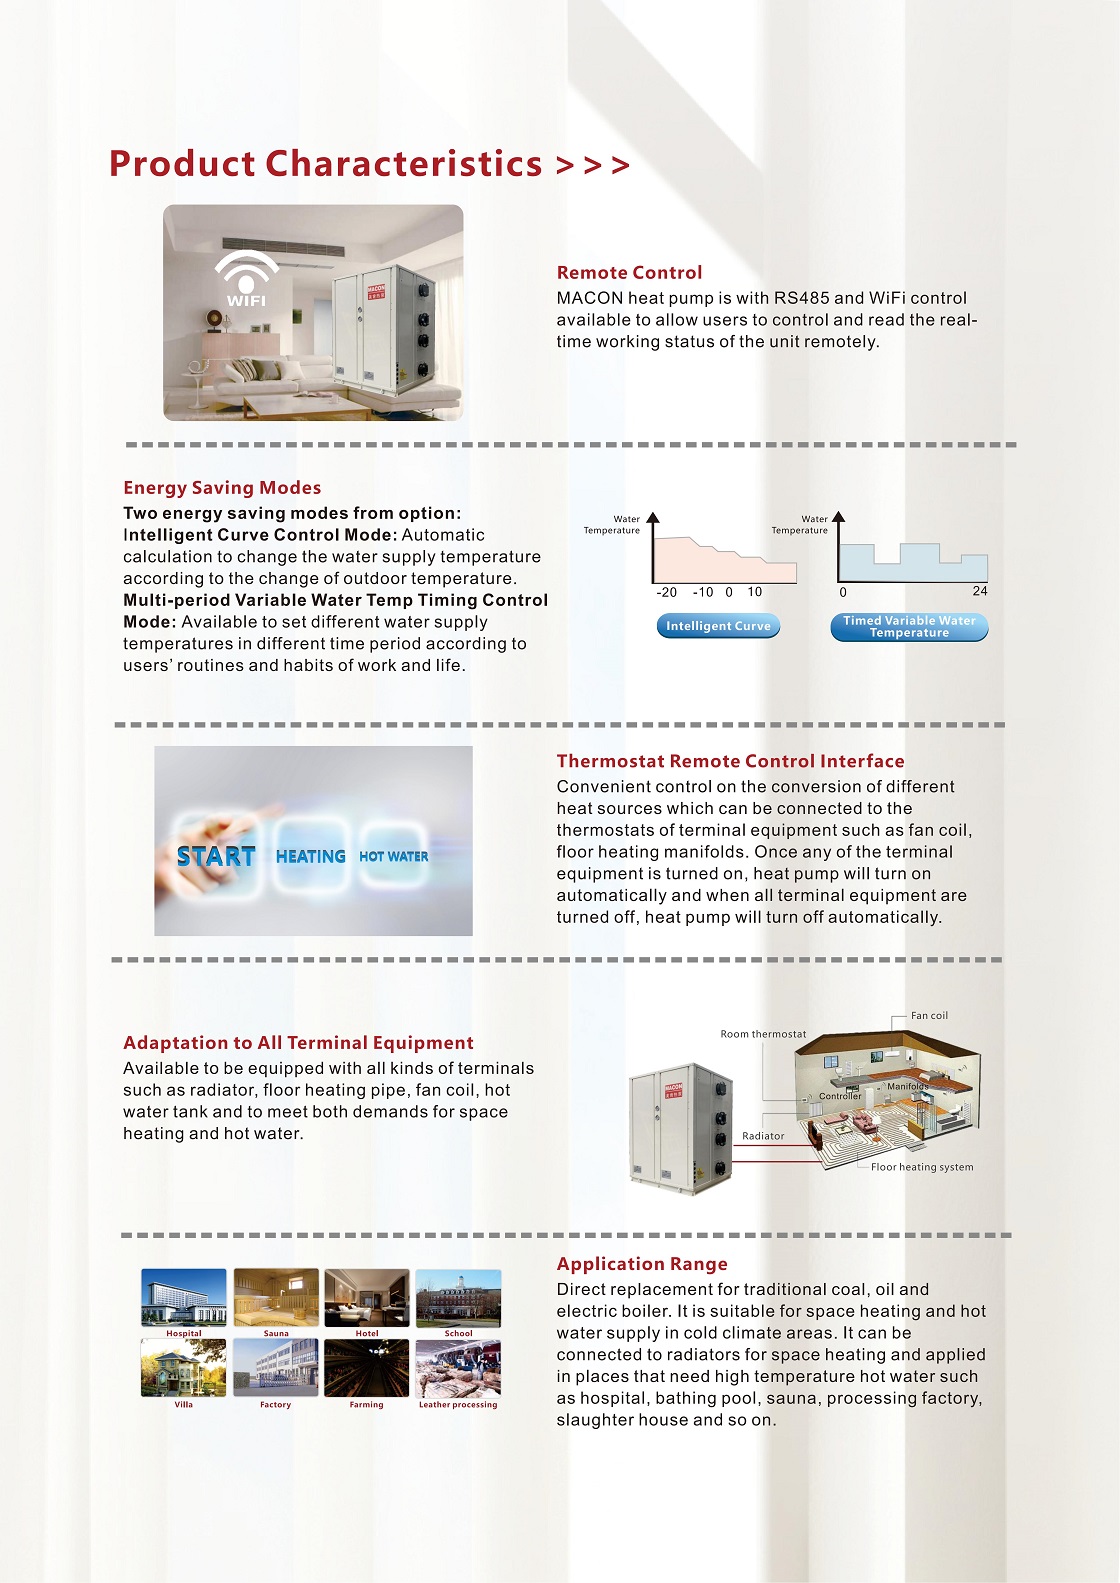 Catalogue of MACON Geothermal High Temperature Heat Pump_页面_3.jpg